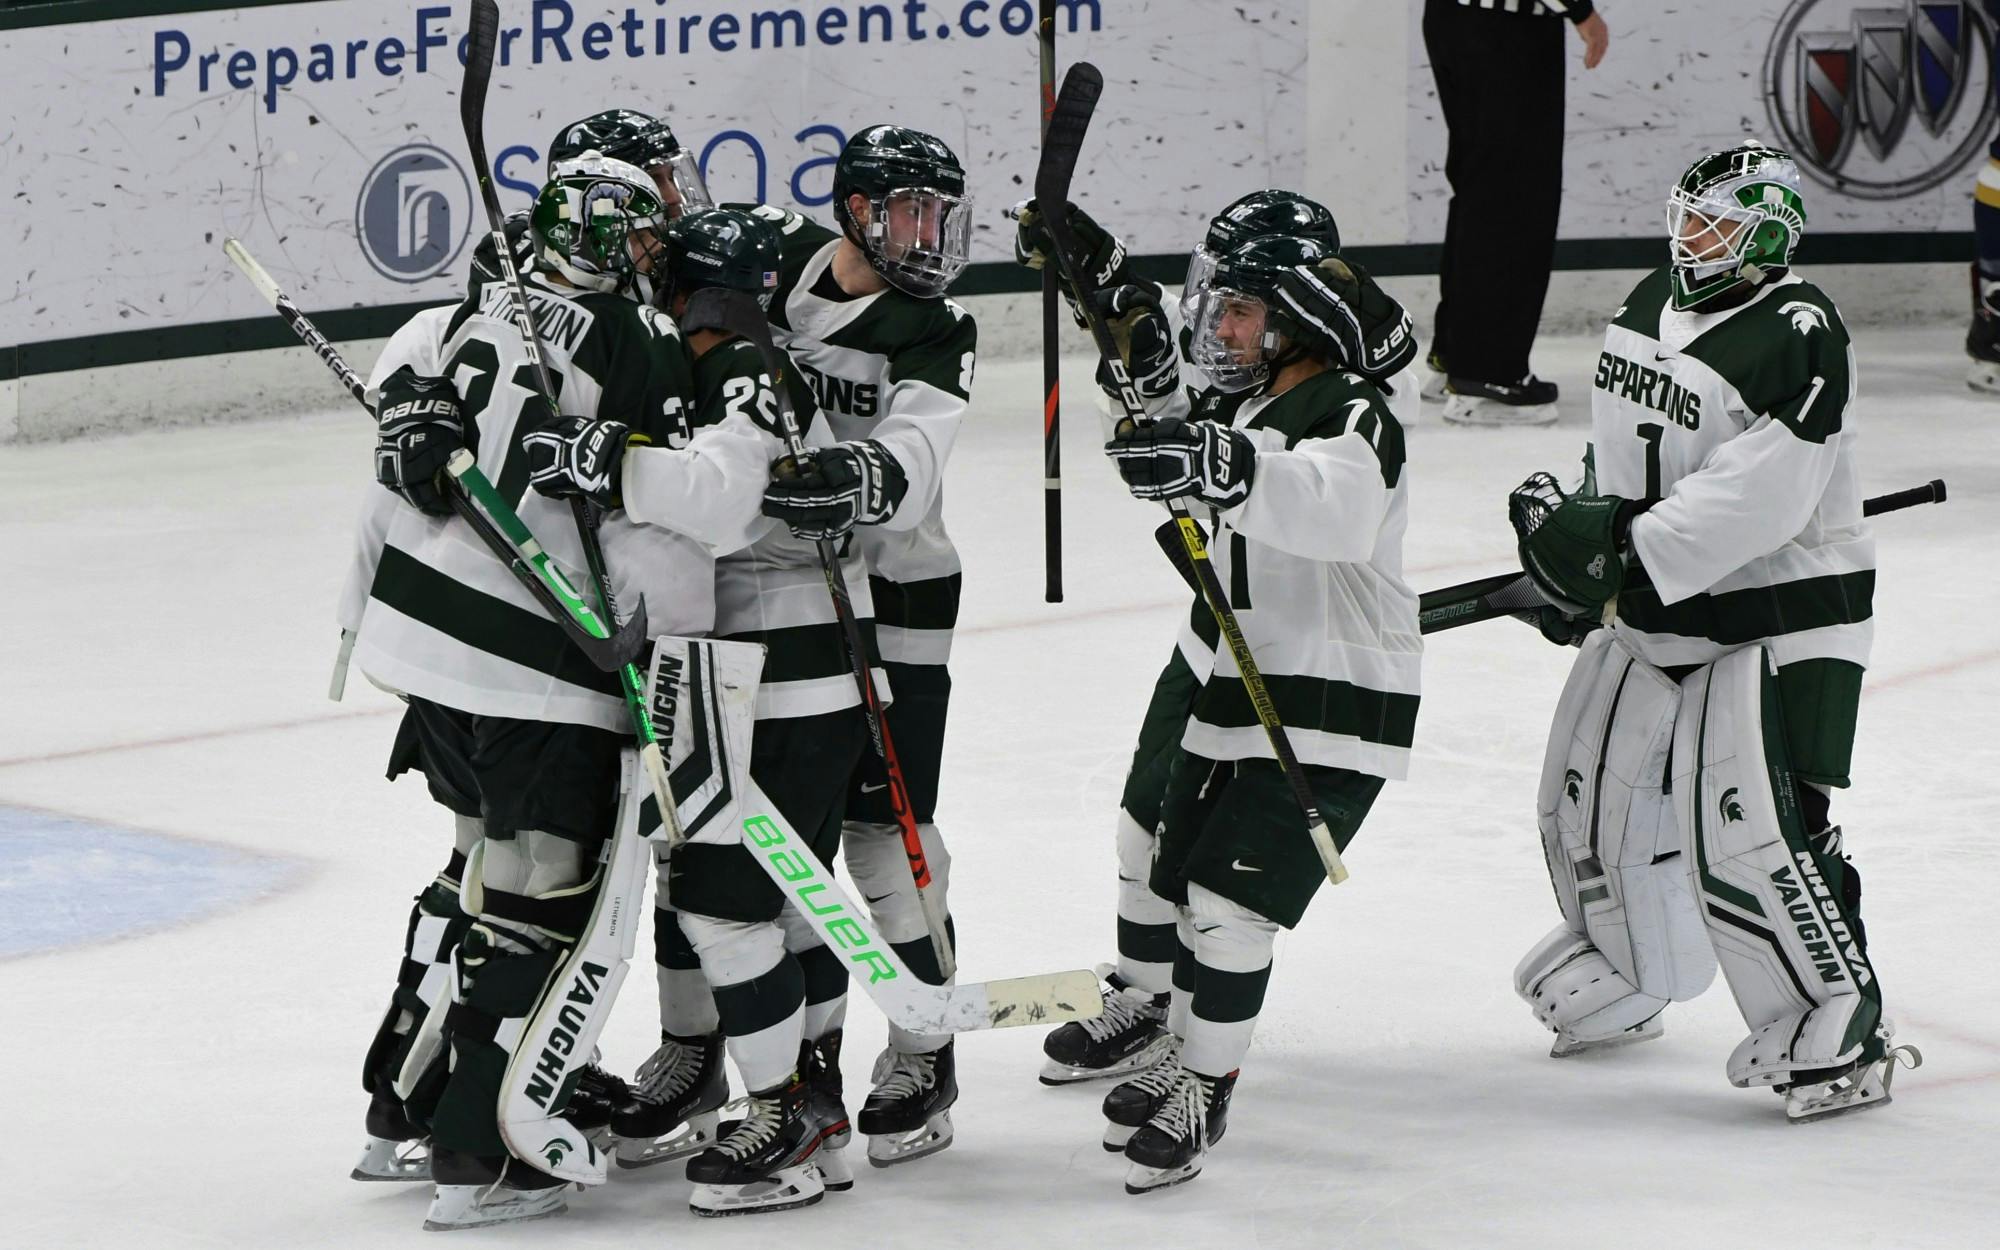 <p>As the buzzer sounds at Munn Ice Arena, it was official: The Spartans upset the Fighting Irish, 3-2, on Nov. 23, 2019. Two goals went to senior right wing Sam Saliba (10) and one goal went to Logan Lambdin (71).</p>